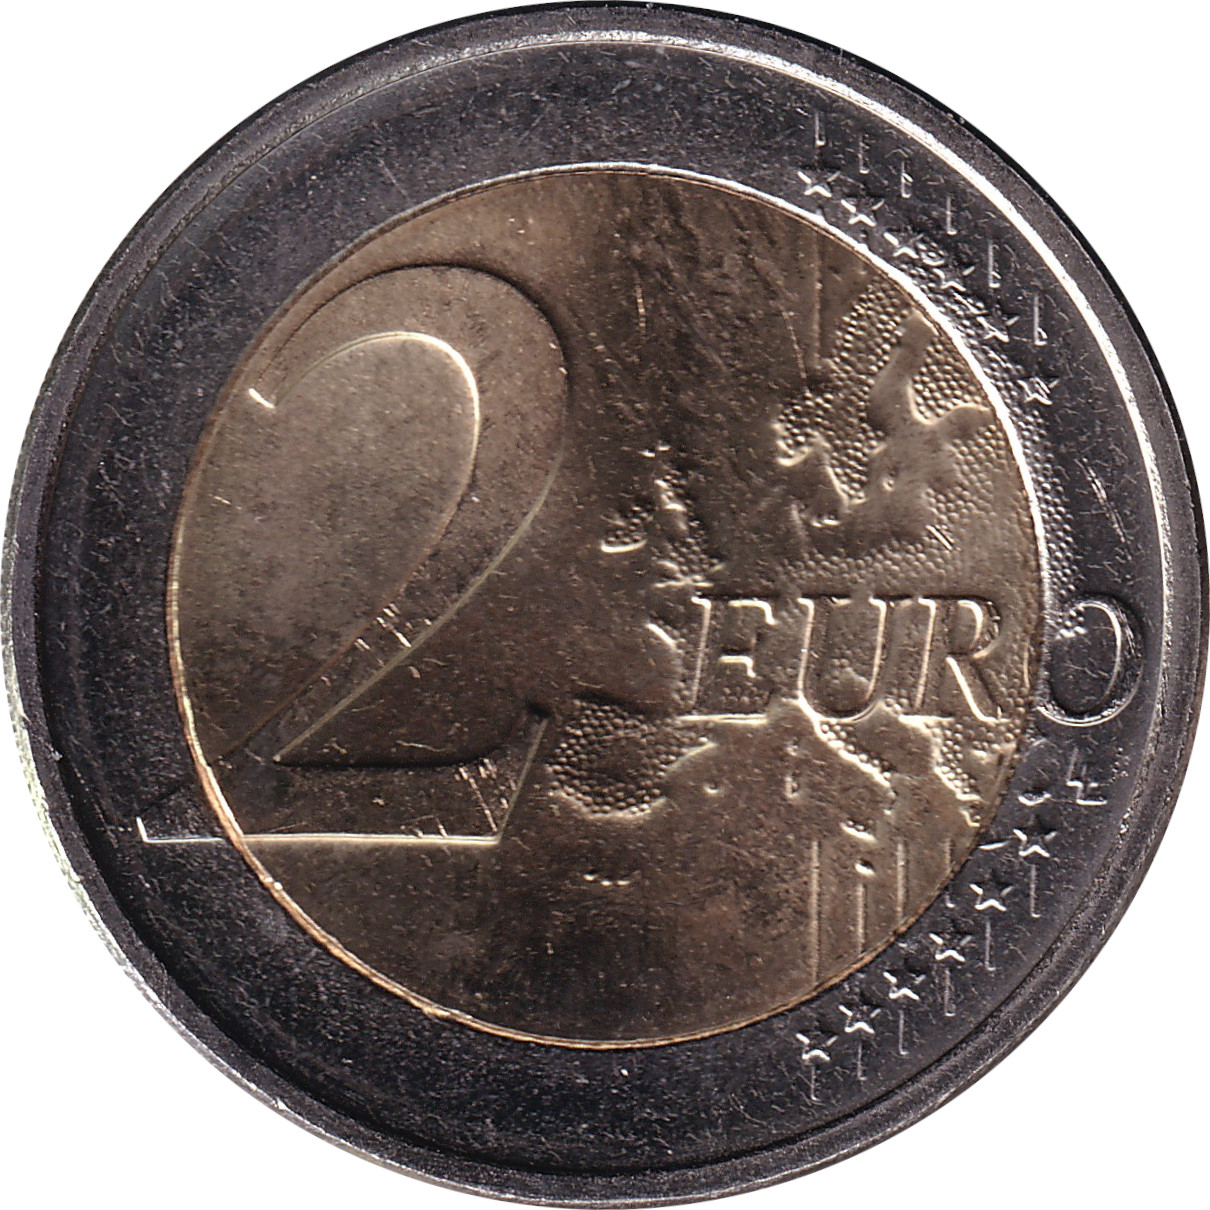 2 euro - Constitution - 150 years